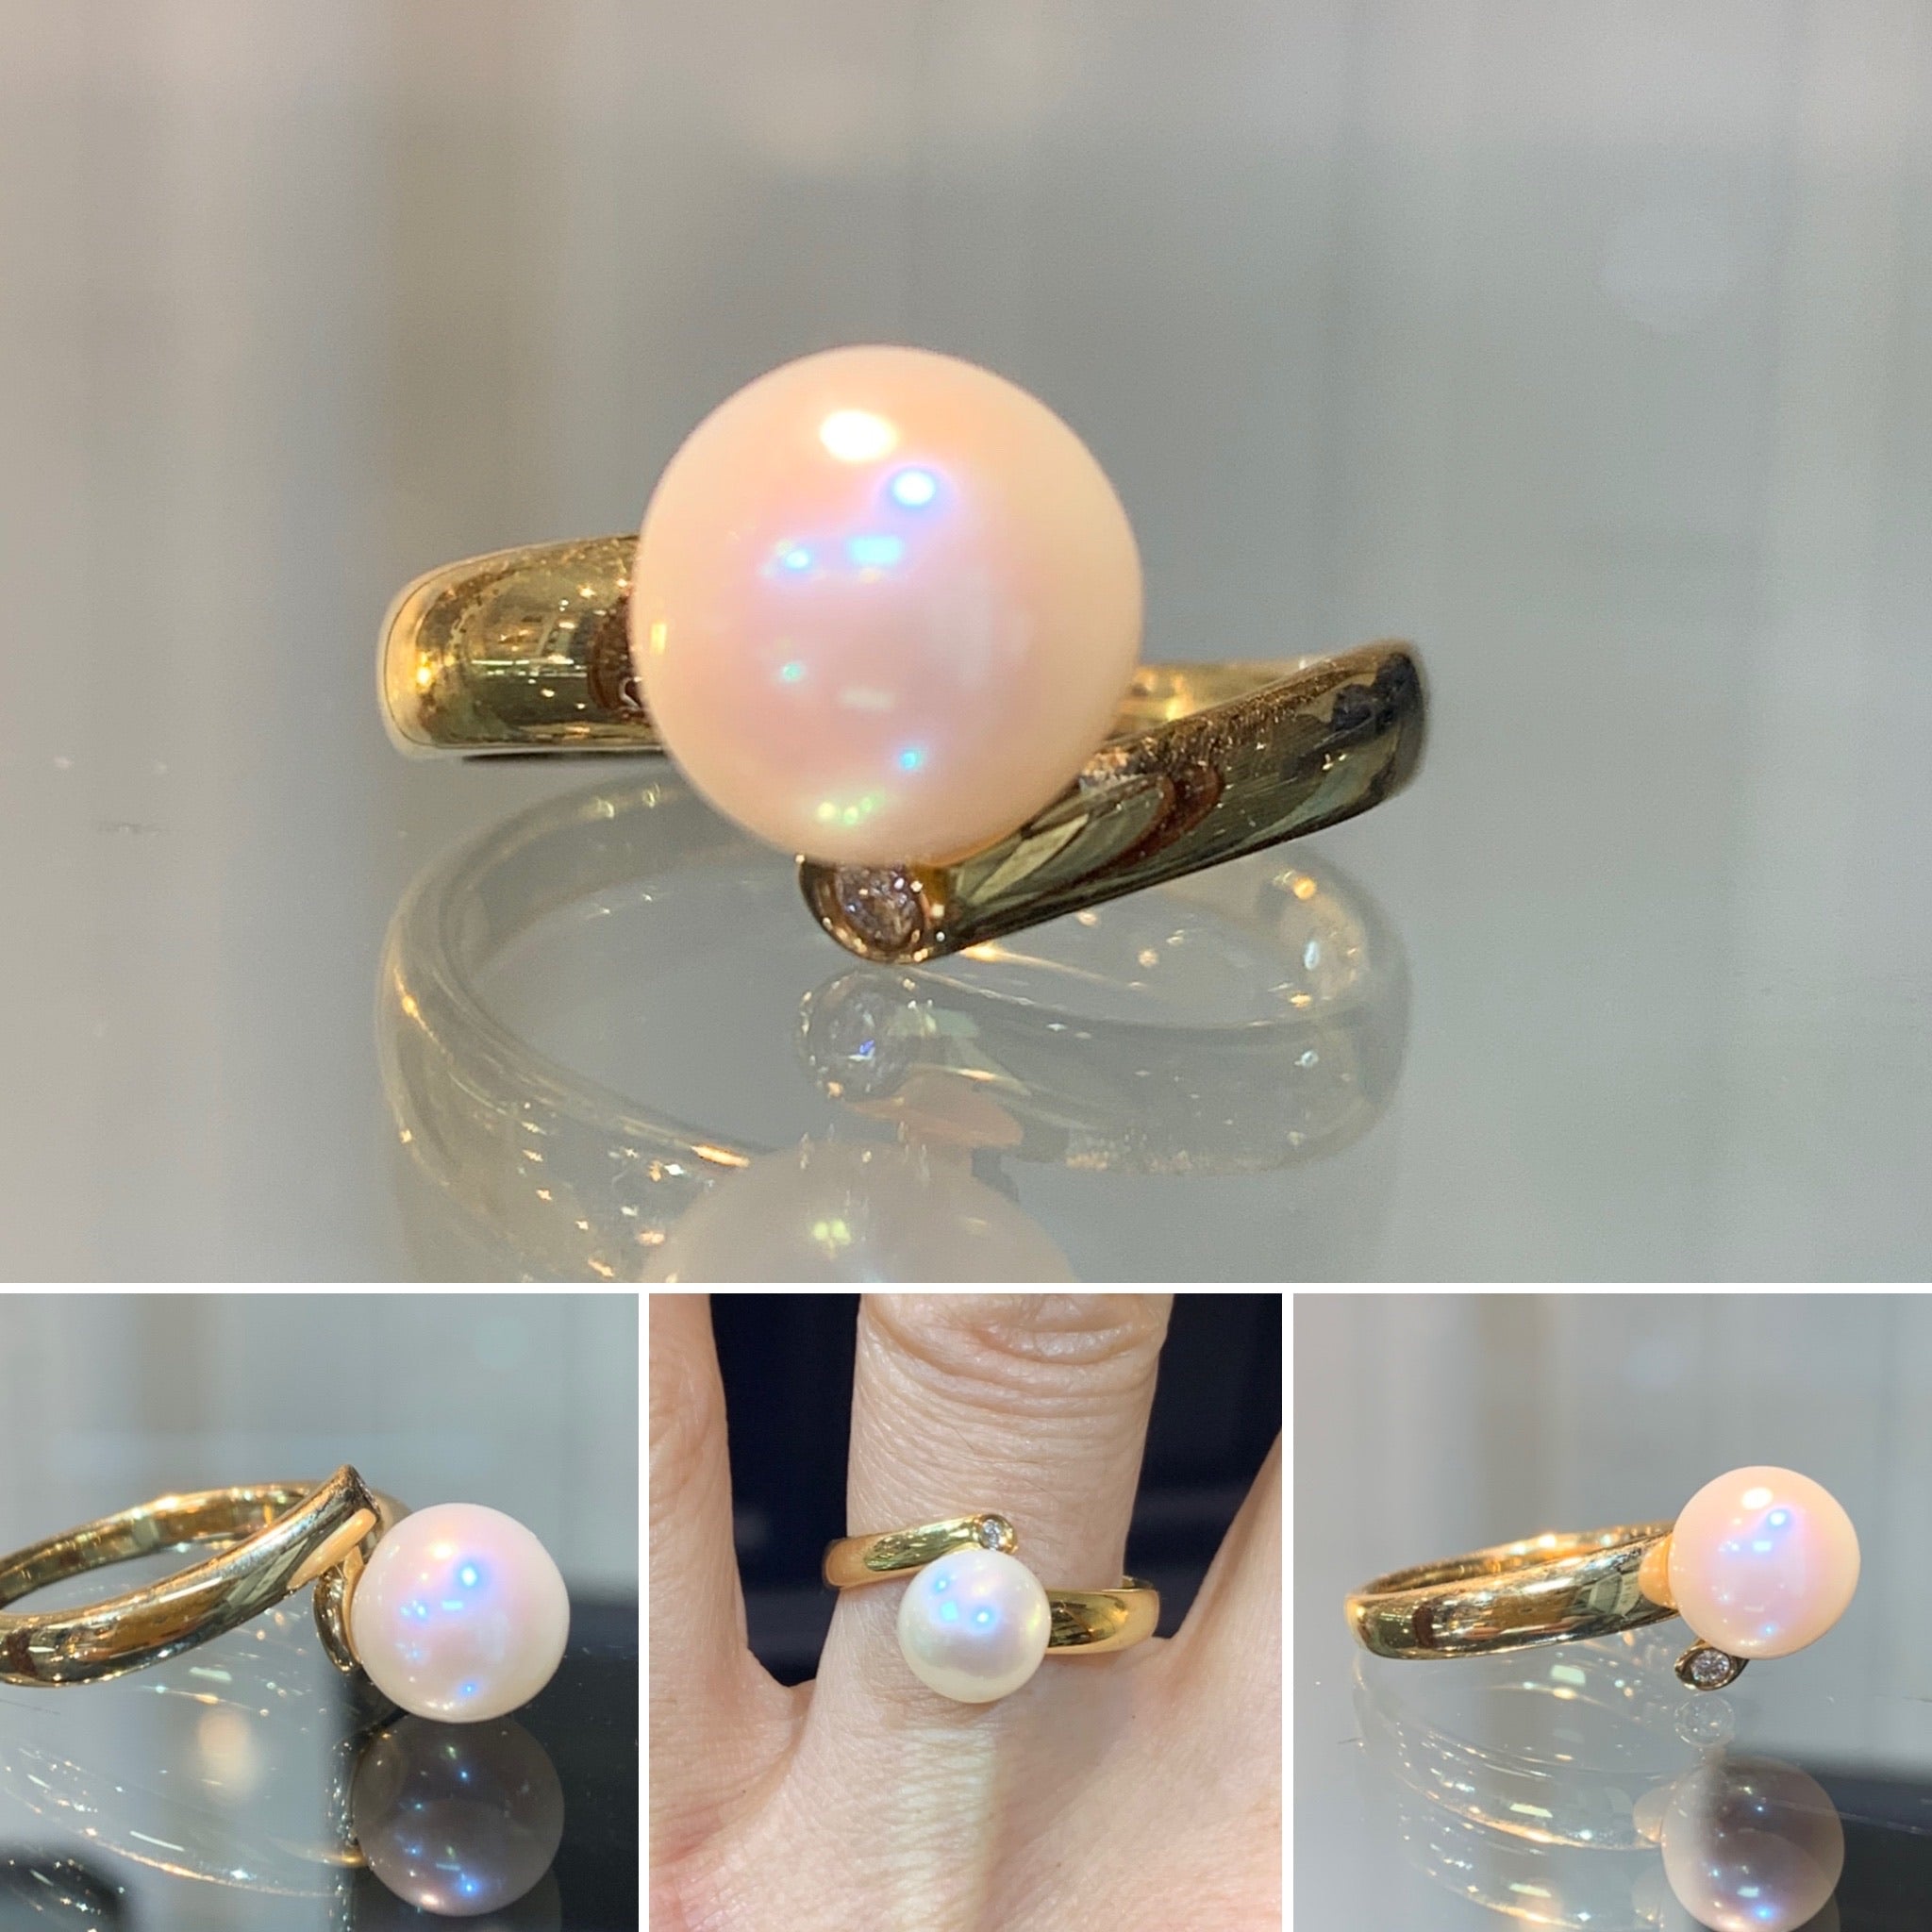 Pearl & Gold Ring